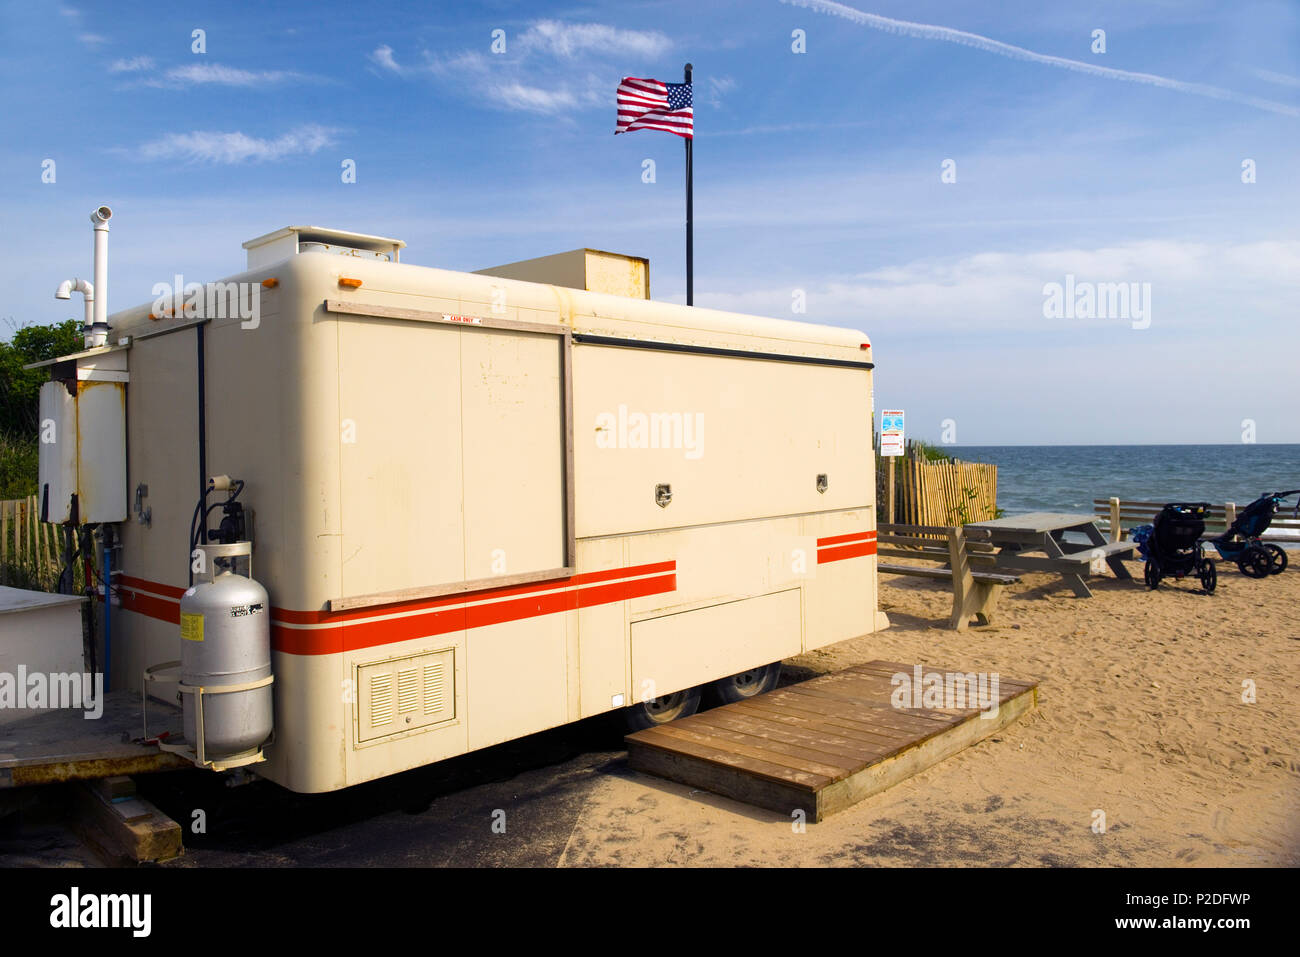 food stand on wheels closed in off season in parking lot of famed surfing beach Ditch Plains in Montauk, New York Stock Photo